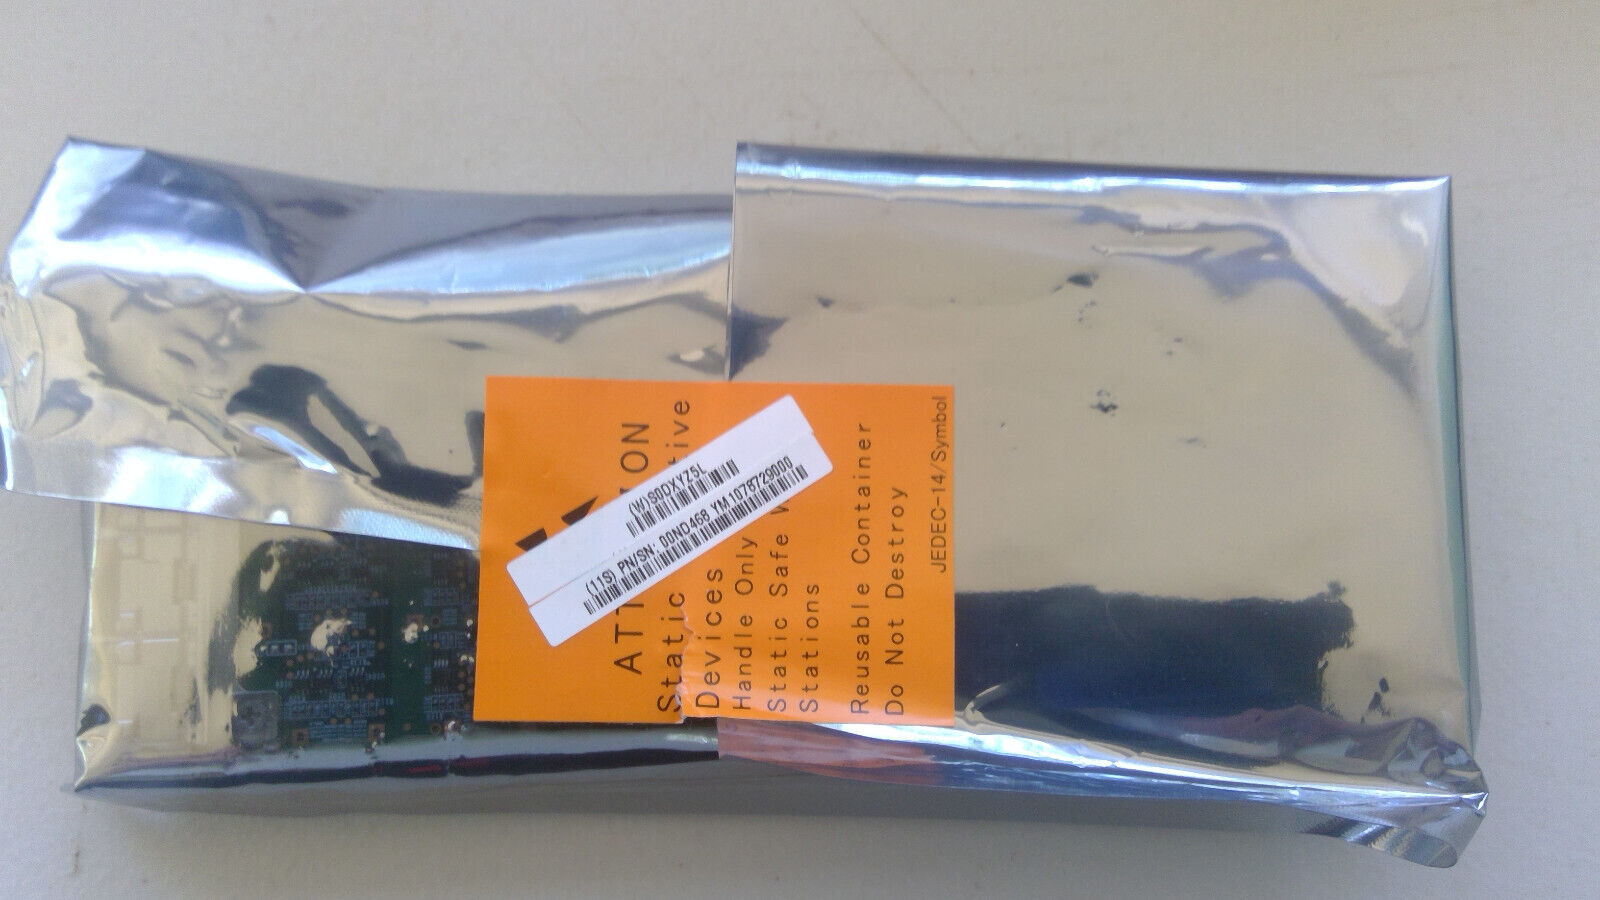 NEW - Factory Sealed - IBM 00ND468 4-Port 10Gb PCIe3 Network Adapter Card - VGC